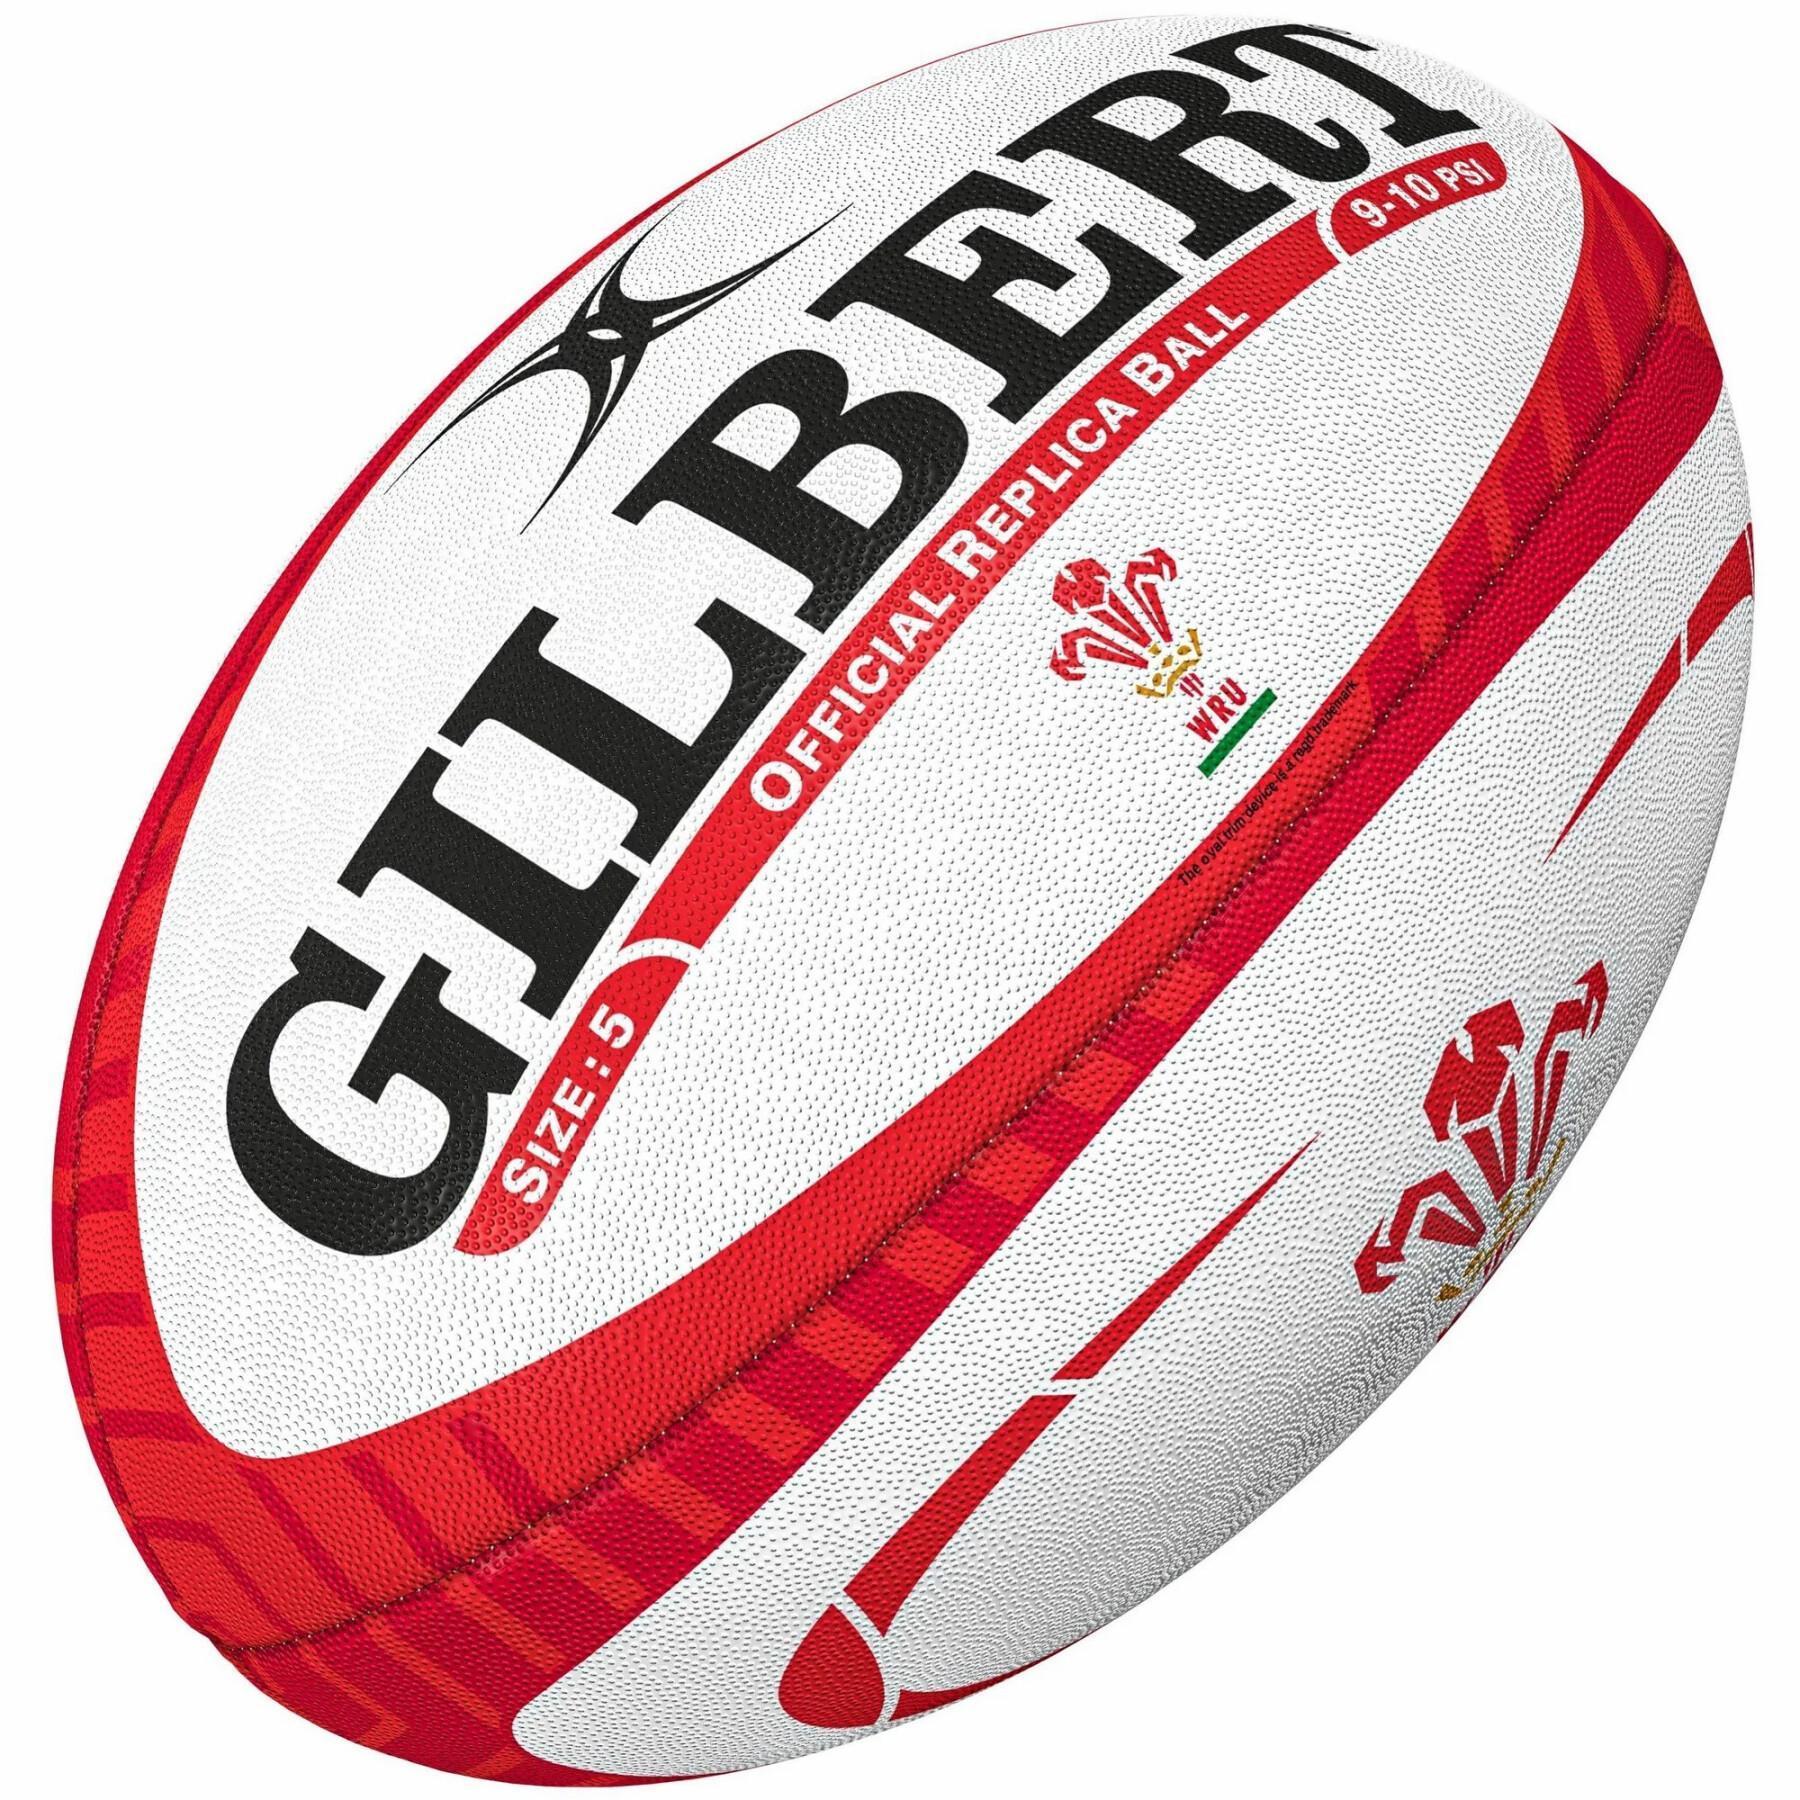 Pack of 10 Balls Wales